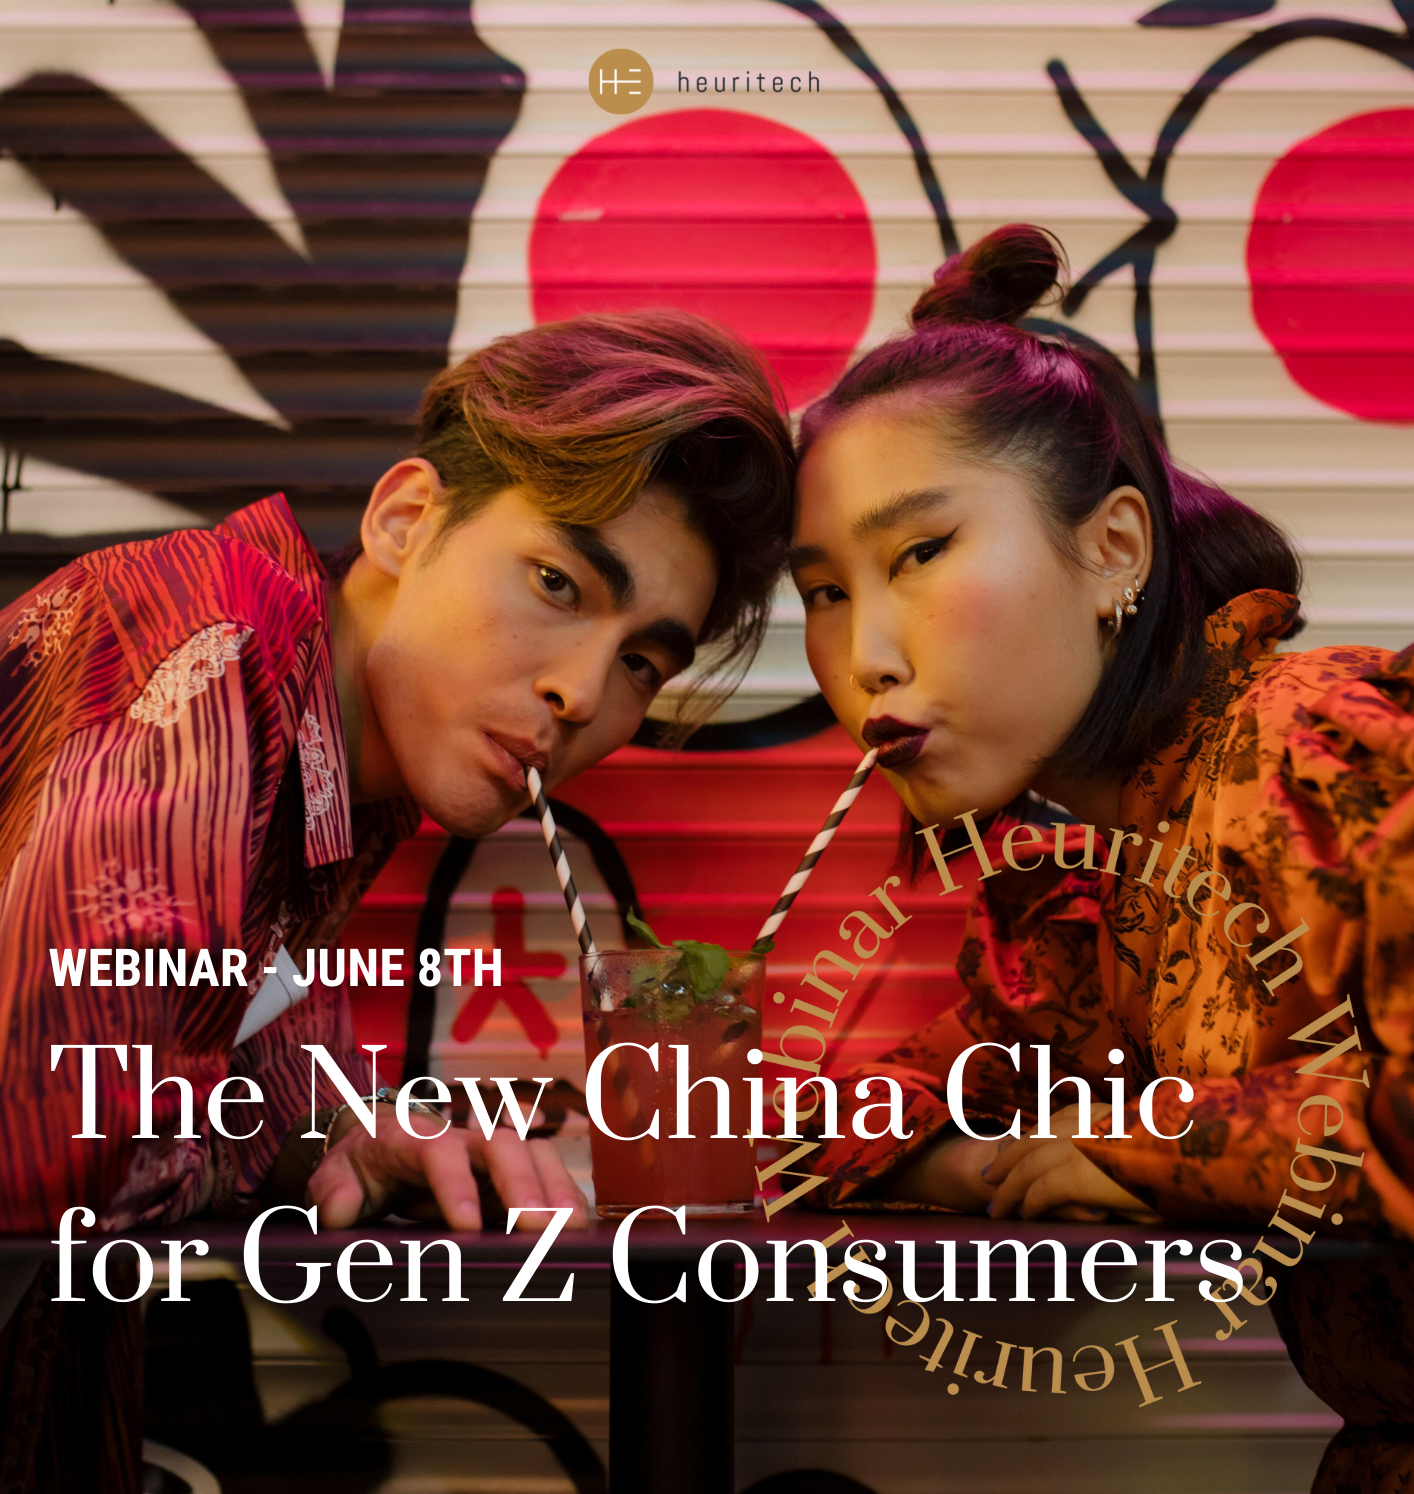 The New China Chic for Gen Z Consumers Heuritech webinar